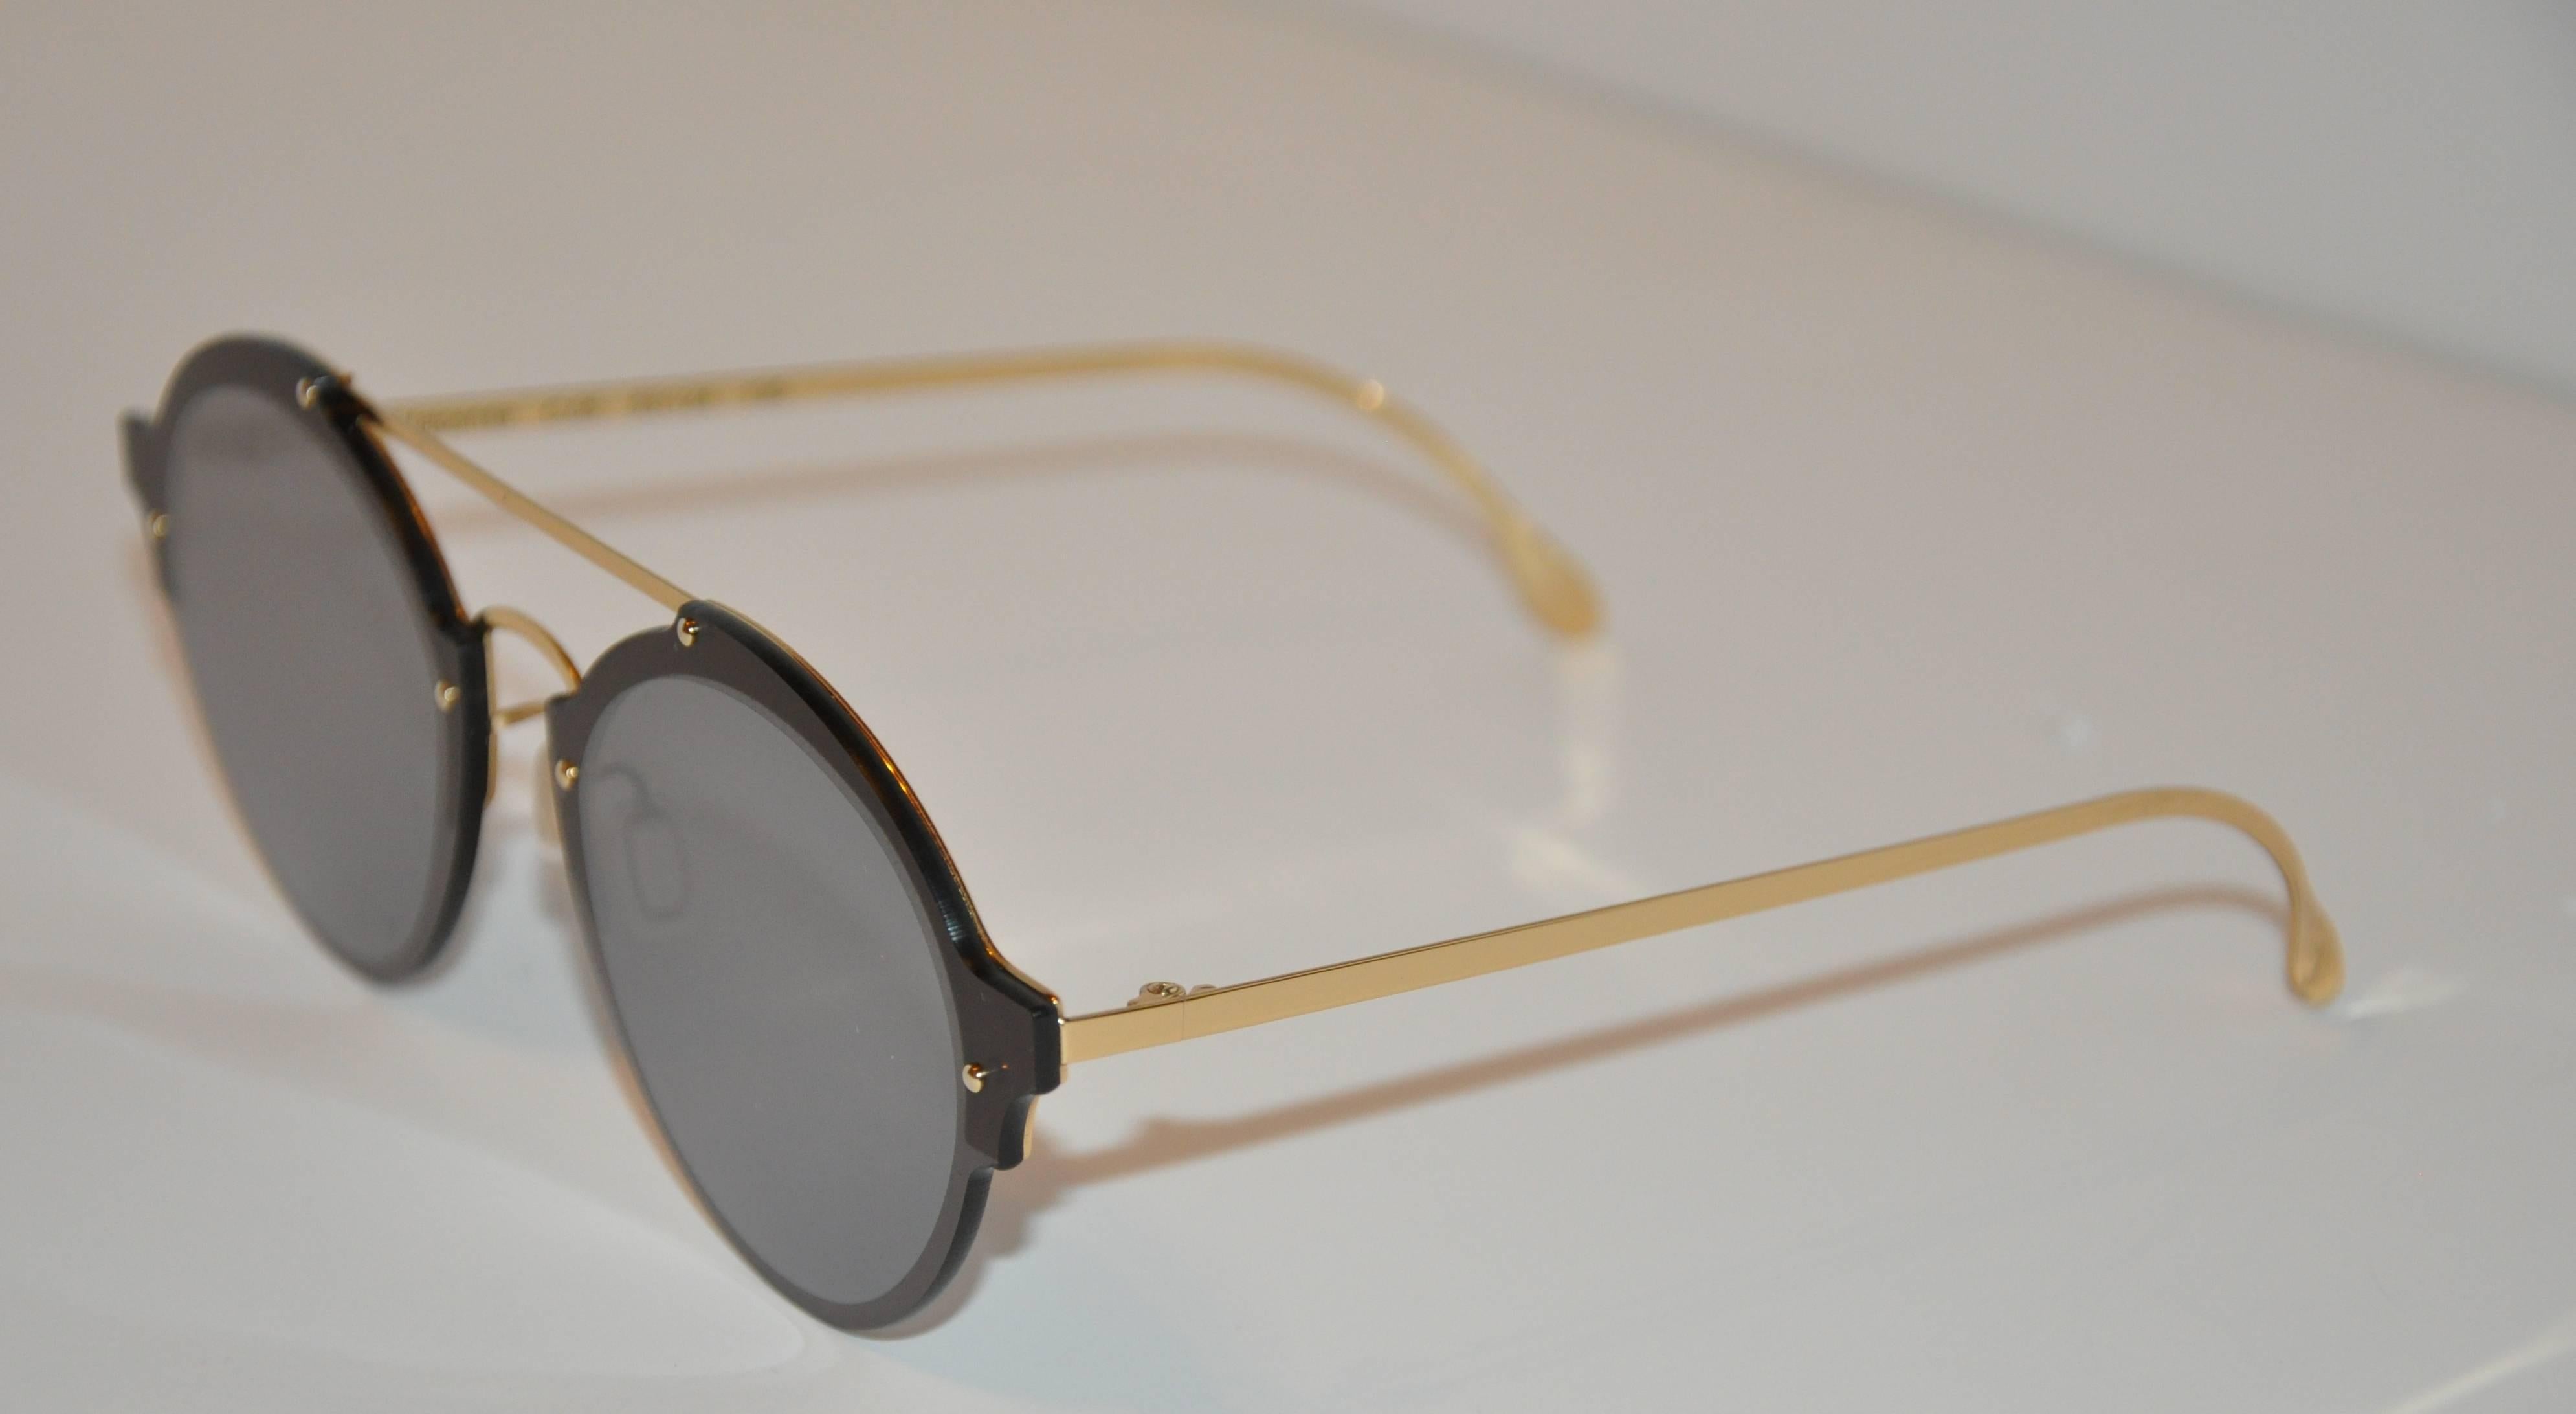 Illesteva detailed polished gold hardware hand-made frames are accented with gold studs. The front is finished with black frame surrounding the lens. The length across the front measures 5 7/8", height is 2 1/16", arms are 5 3/8" in